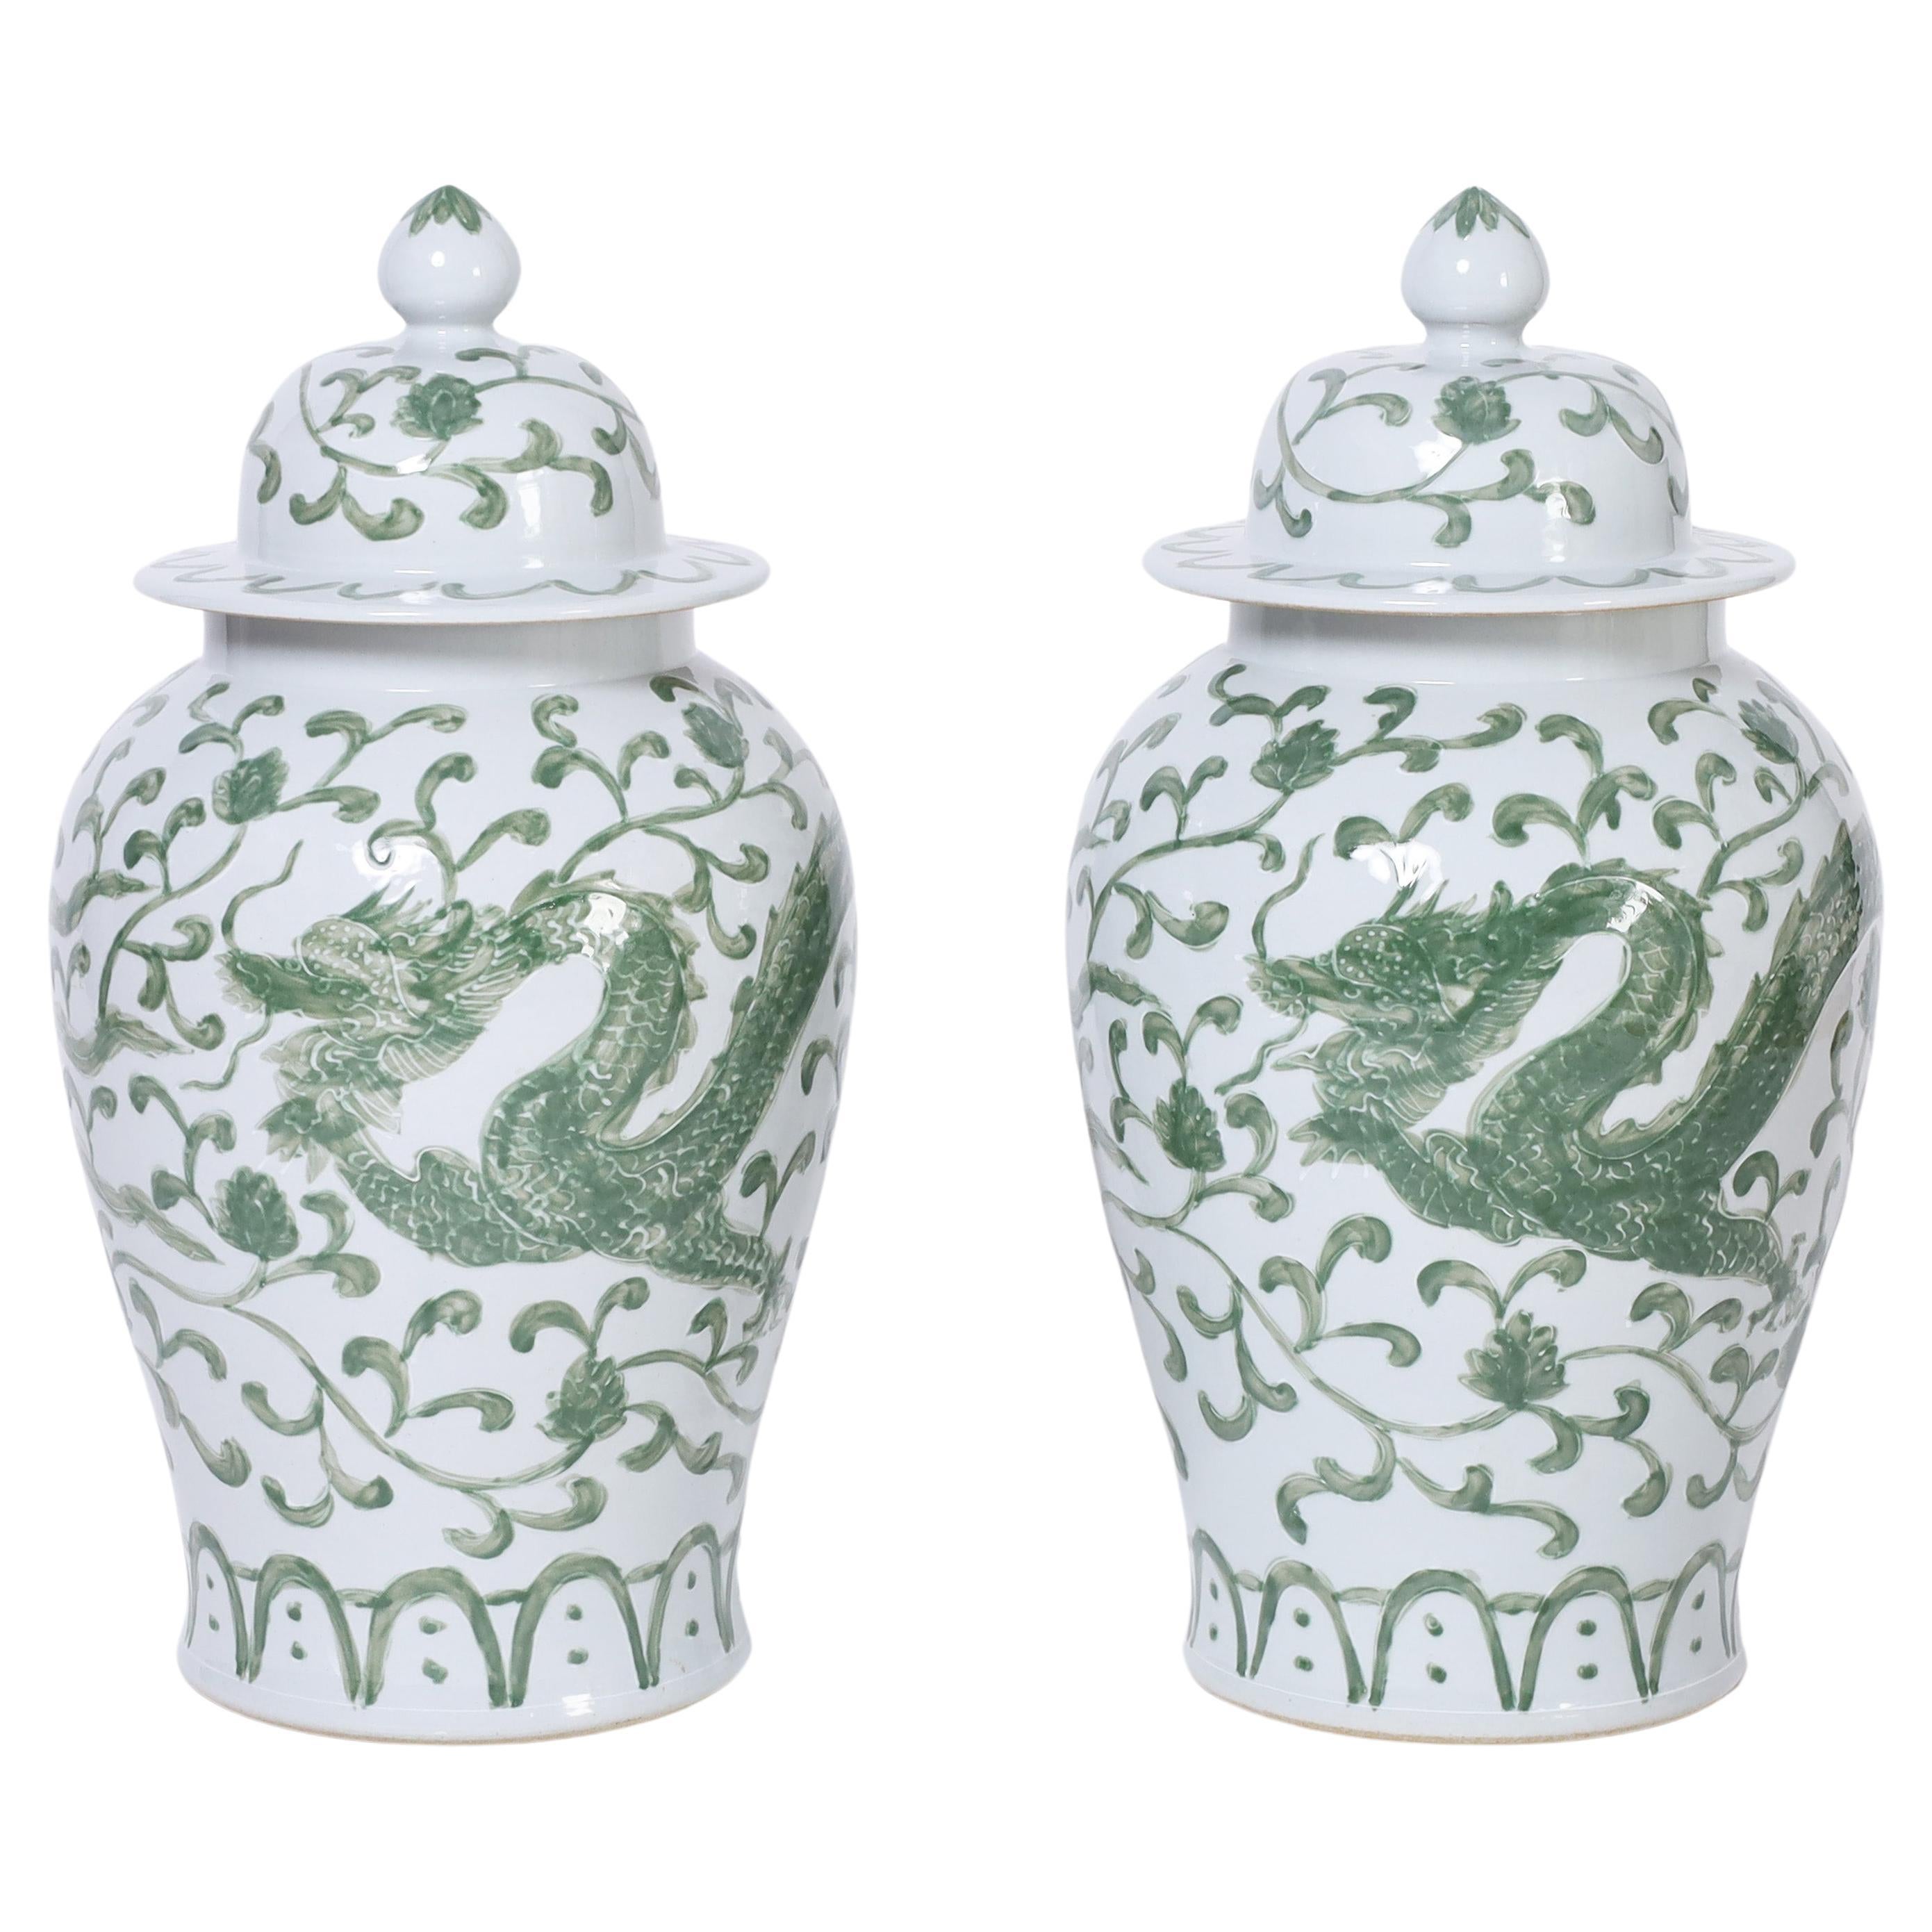 Pair of Large Chinese Export Green and White Porcelain Lidded Jars